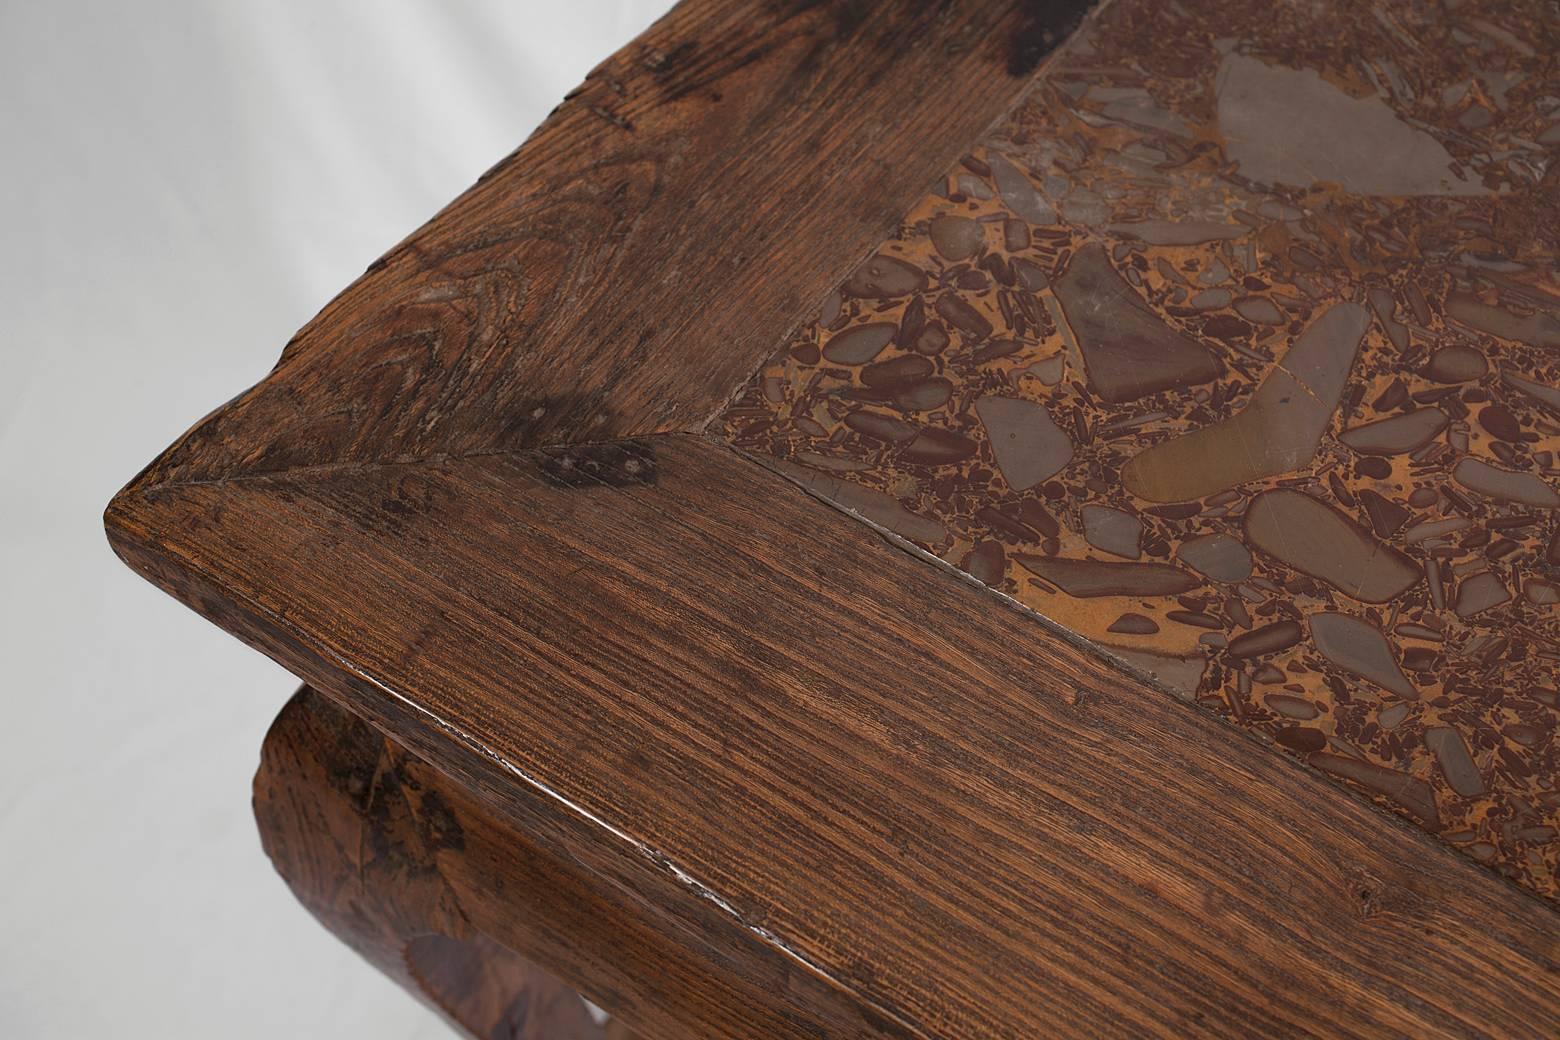 Stone Rare Chinese Ming Dynasty Table with Puddingstone Top, 16th-17th Century Elmwood For Sale